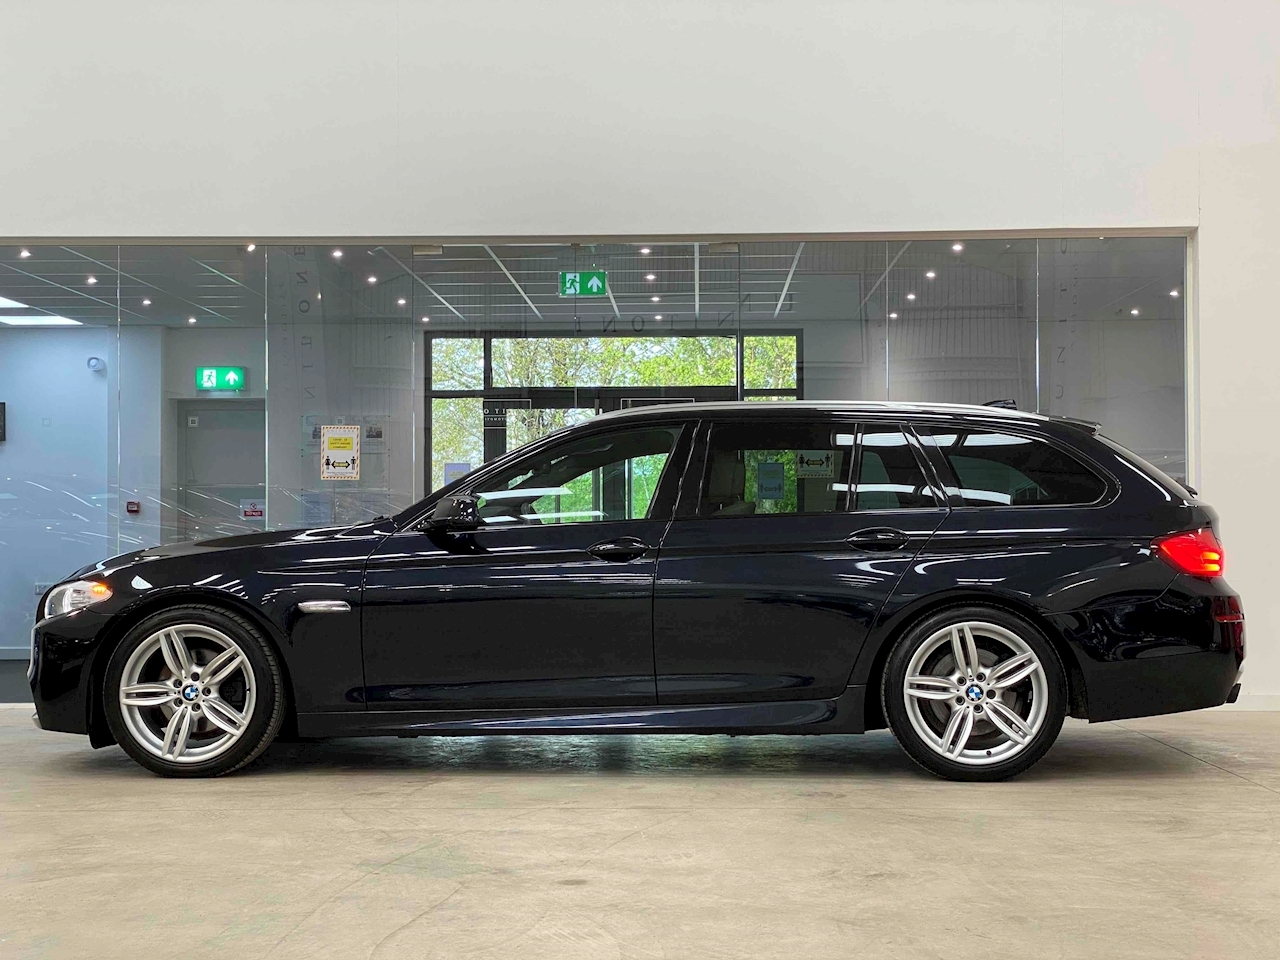 Used 2011 BMW 5 Series 520D M Sport Edition Touring 2.0 4dr Estate  Automatic Diesel For Sale in West Sussex